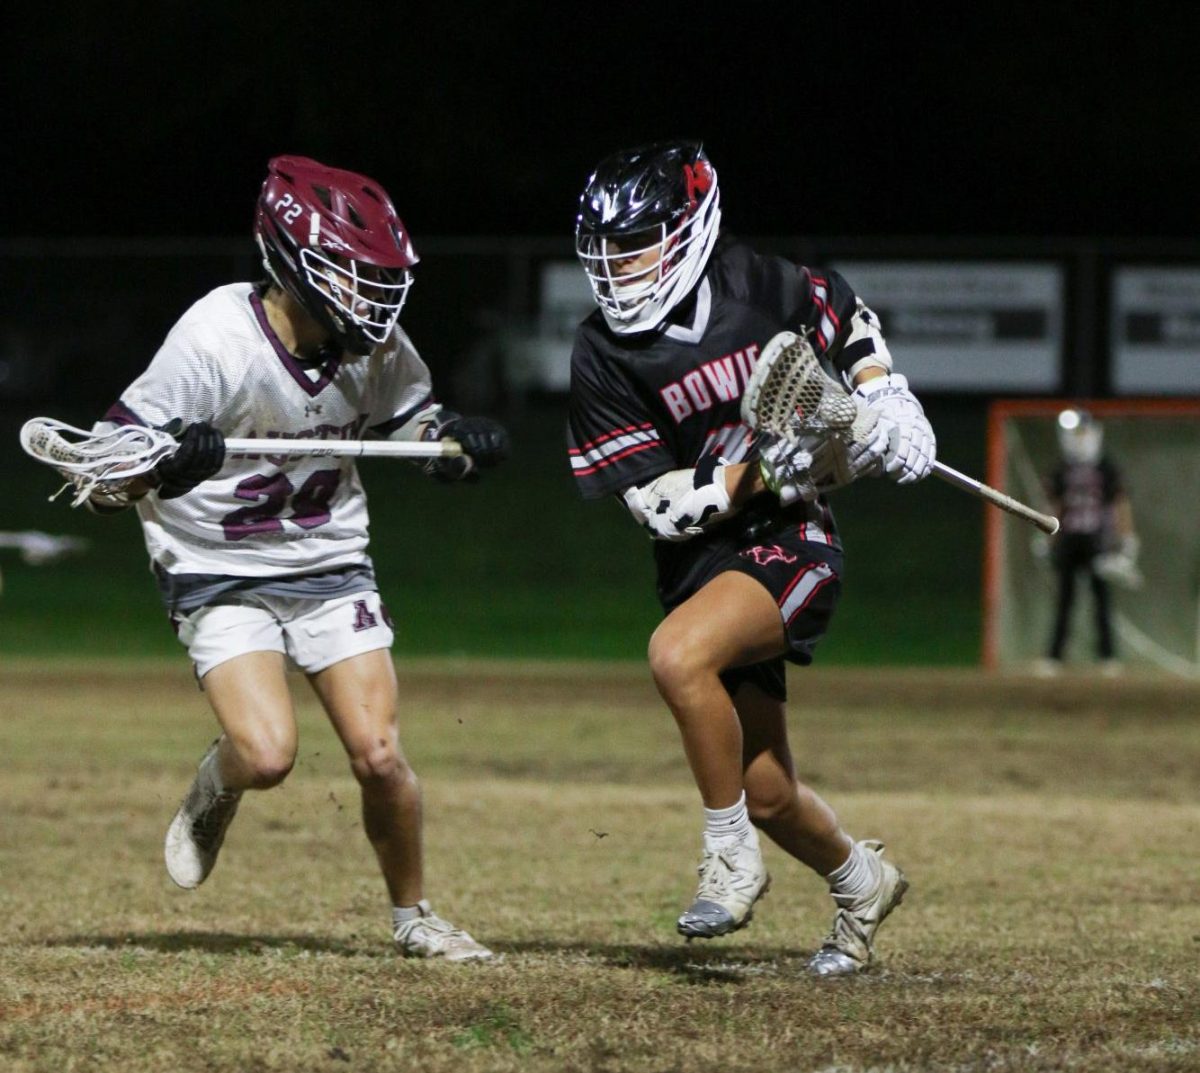 FACE-TO-FACE: Sophomore Cole Wong runs toe-to-toe with an Austin High defender. Bowie struggled offensively and end up losing 21-2 to the Maroons “They are a very experienced and physical team, and we have a lot to work on,” midfielder Wong said. “My game knowledge and field vision is better this year and I hope that I can utilize those skills to score more goals and help my teammates.”